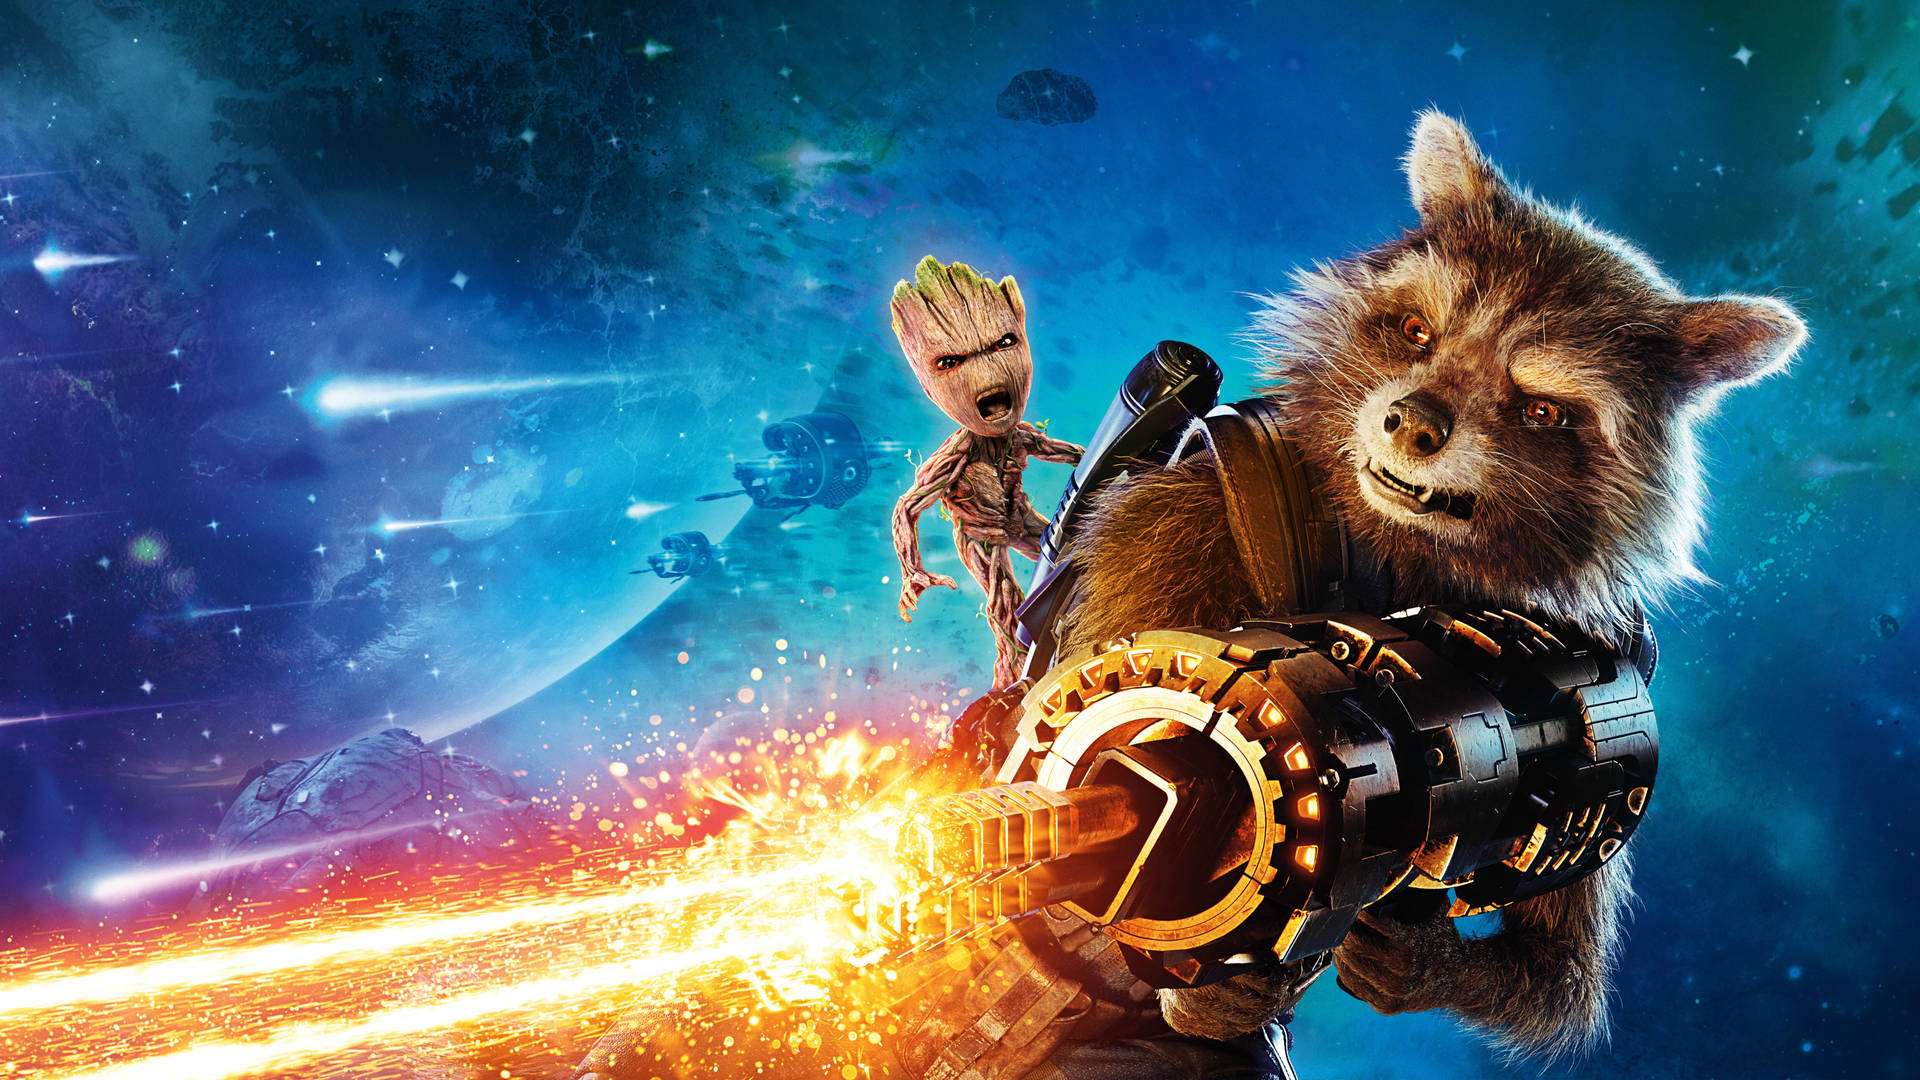 Marvel's Guardians of the Galaxy Wallpaper